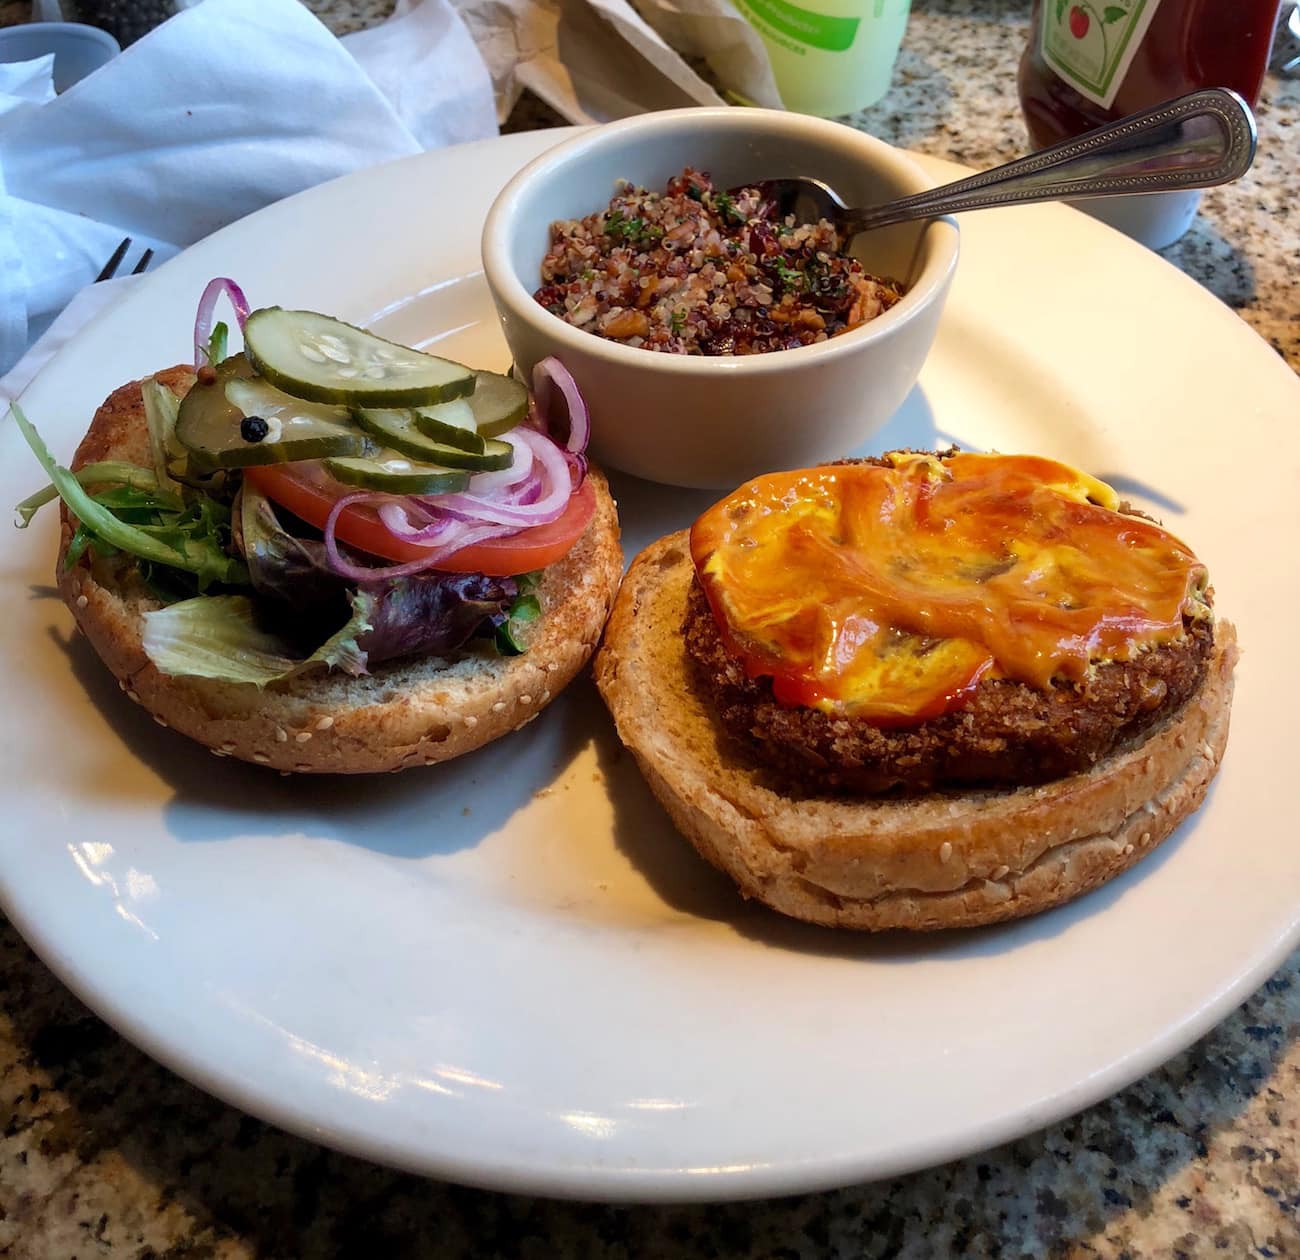 Hempseed burger from Bella Green in Houston with quinoa side salad